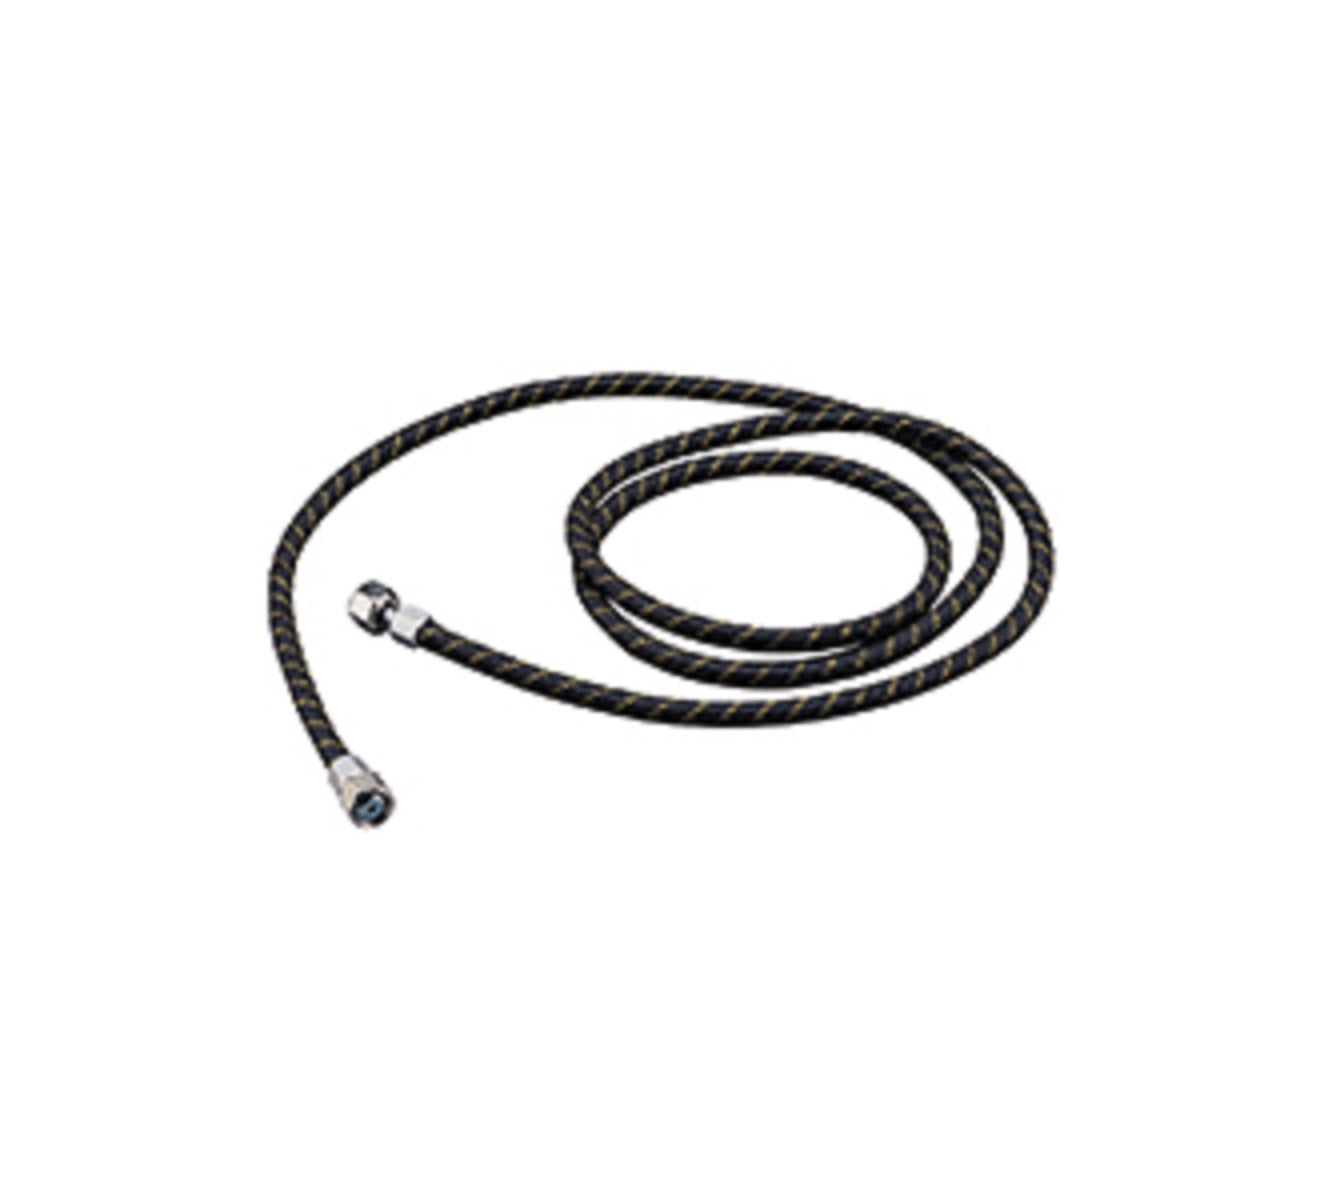 bigceramicstore-com,Air Hose for Paasche L and 62 Sprayer,Paasche,Tools - Airbrushes